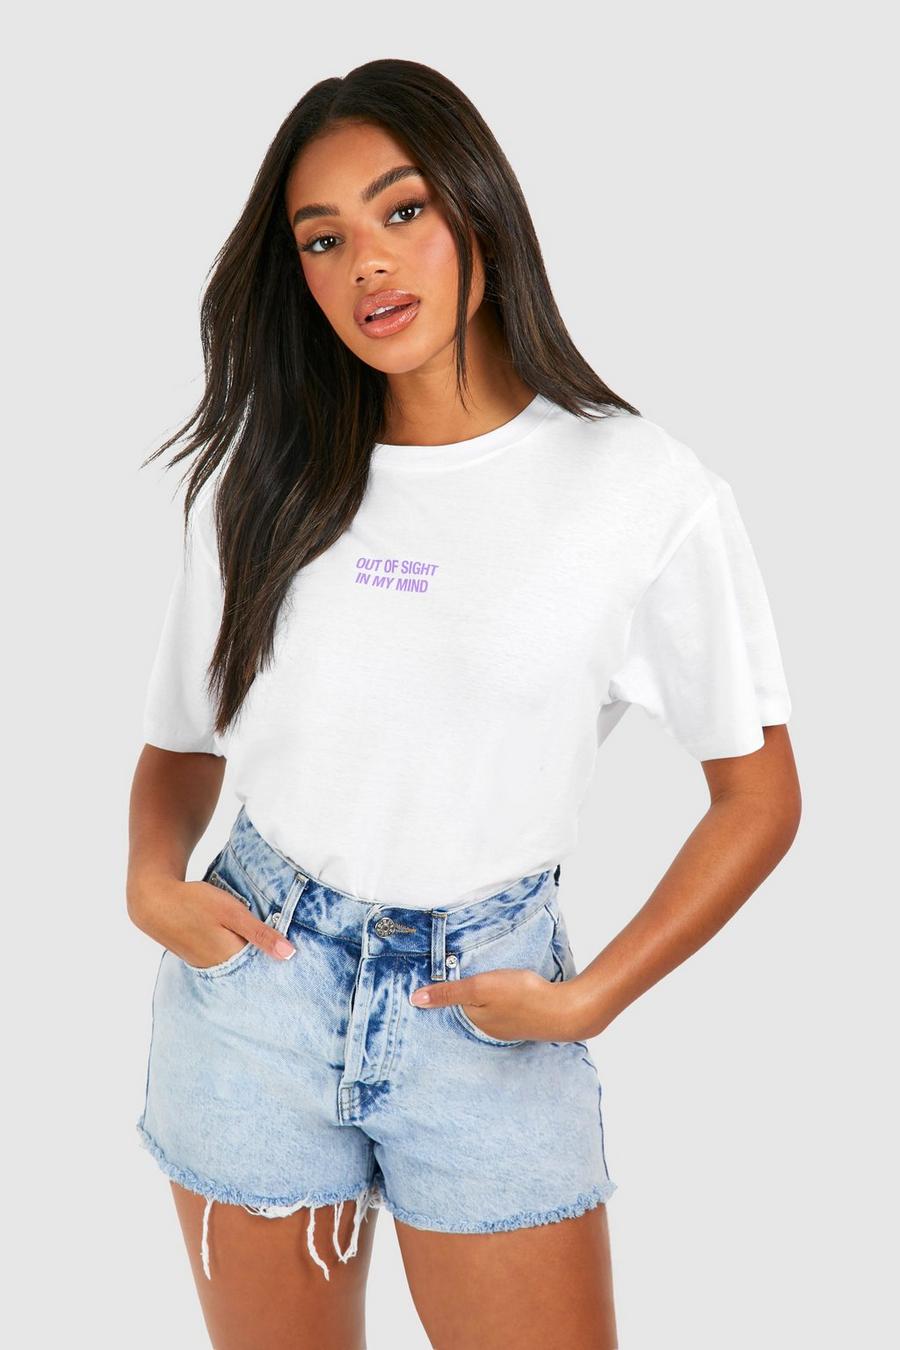 White Oversized Out Of Sight In My Mind Cotton Tee